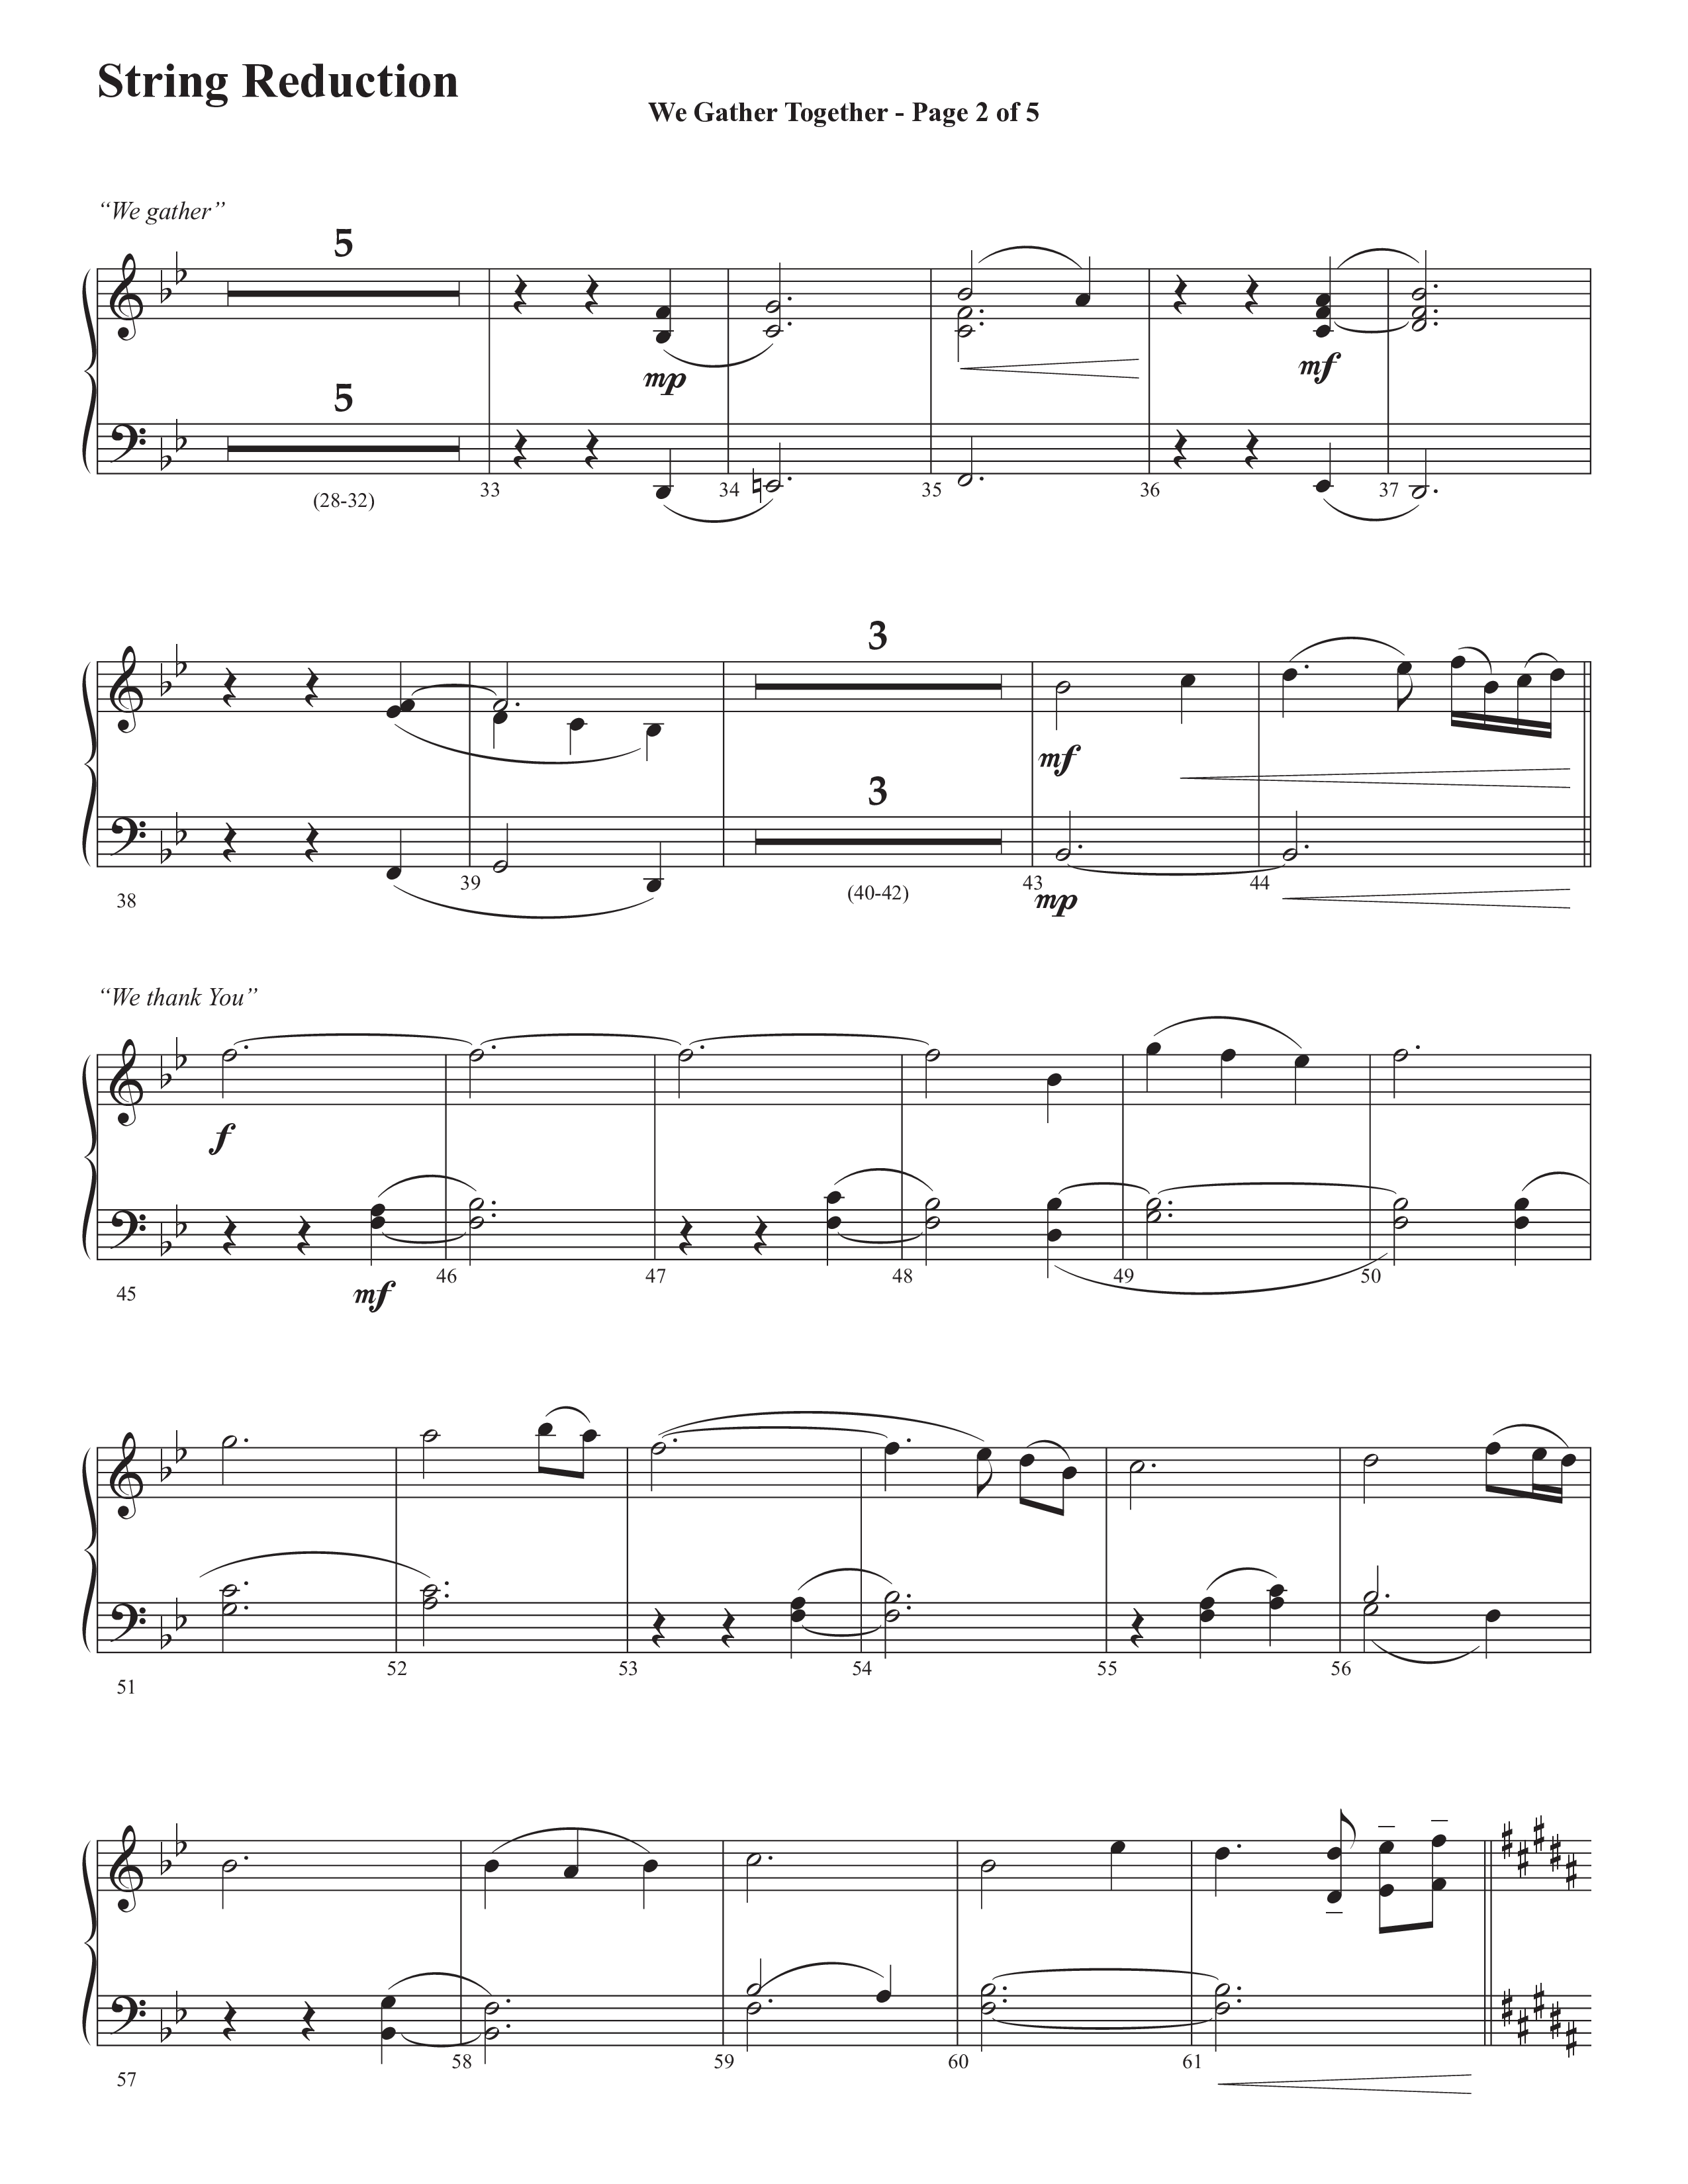 We Gather Together (We Thank You) (Choral Anthem SATB) String Reduction (Semsen Music / Arr. John Bolin / Orch. Cliff Duren)